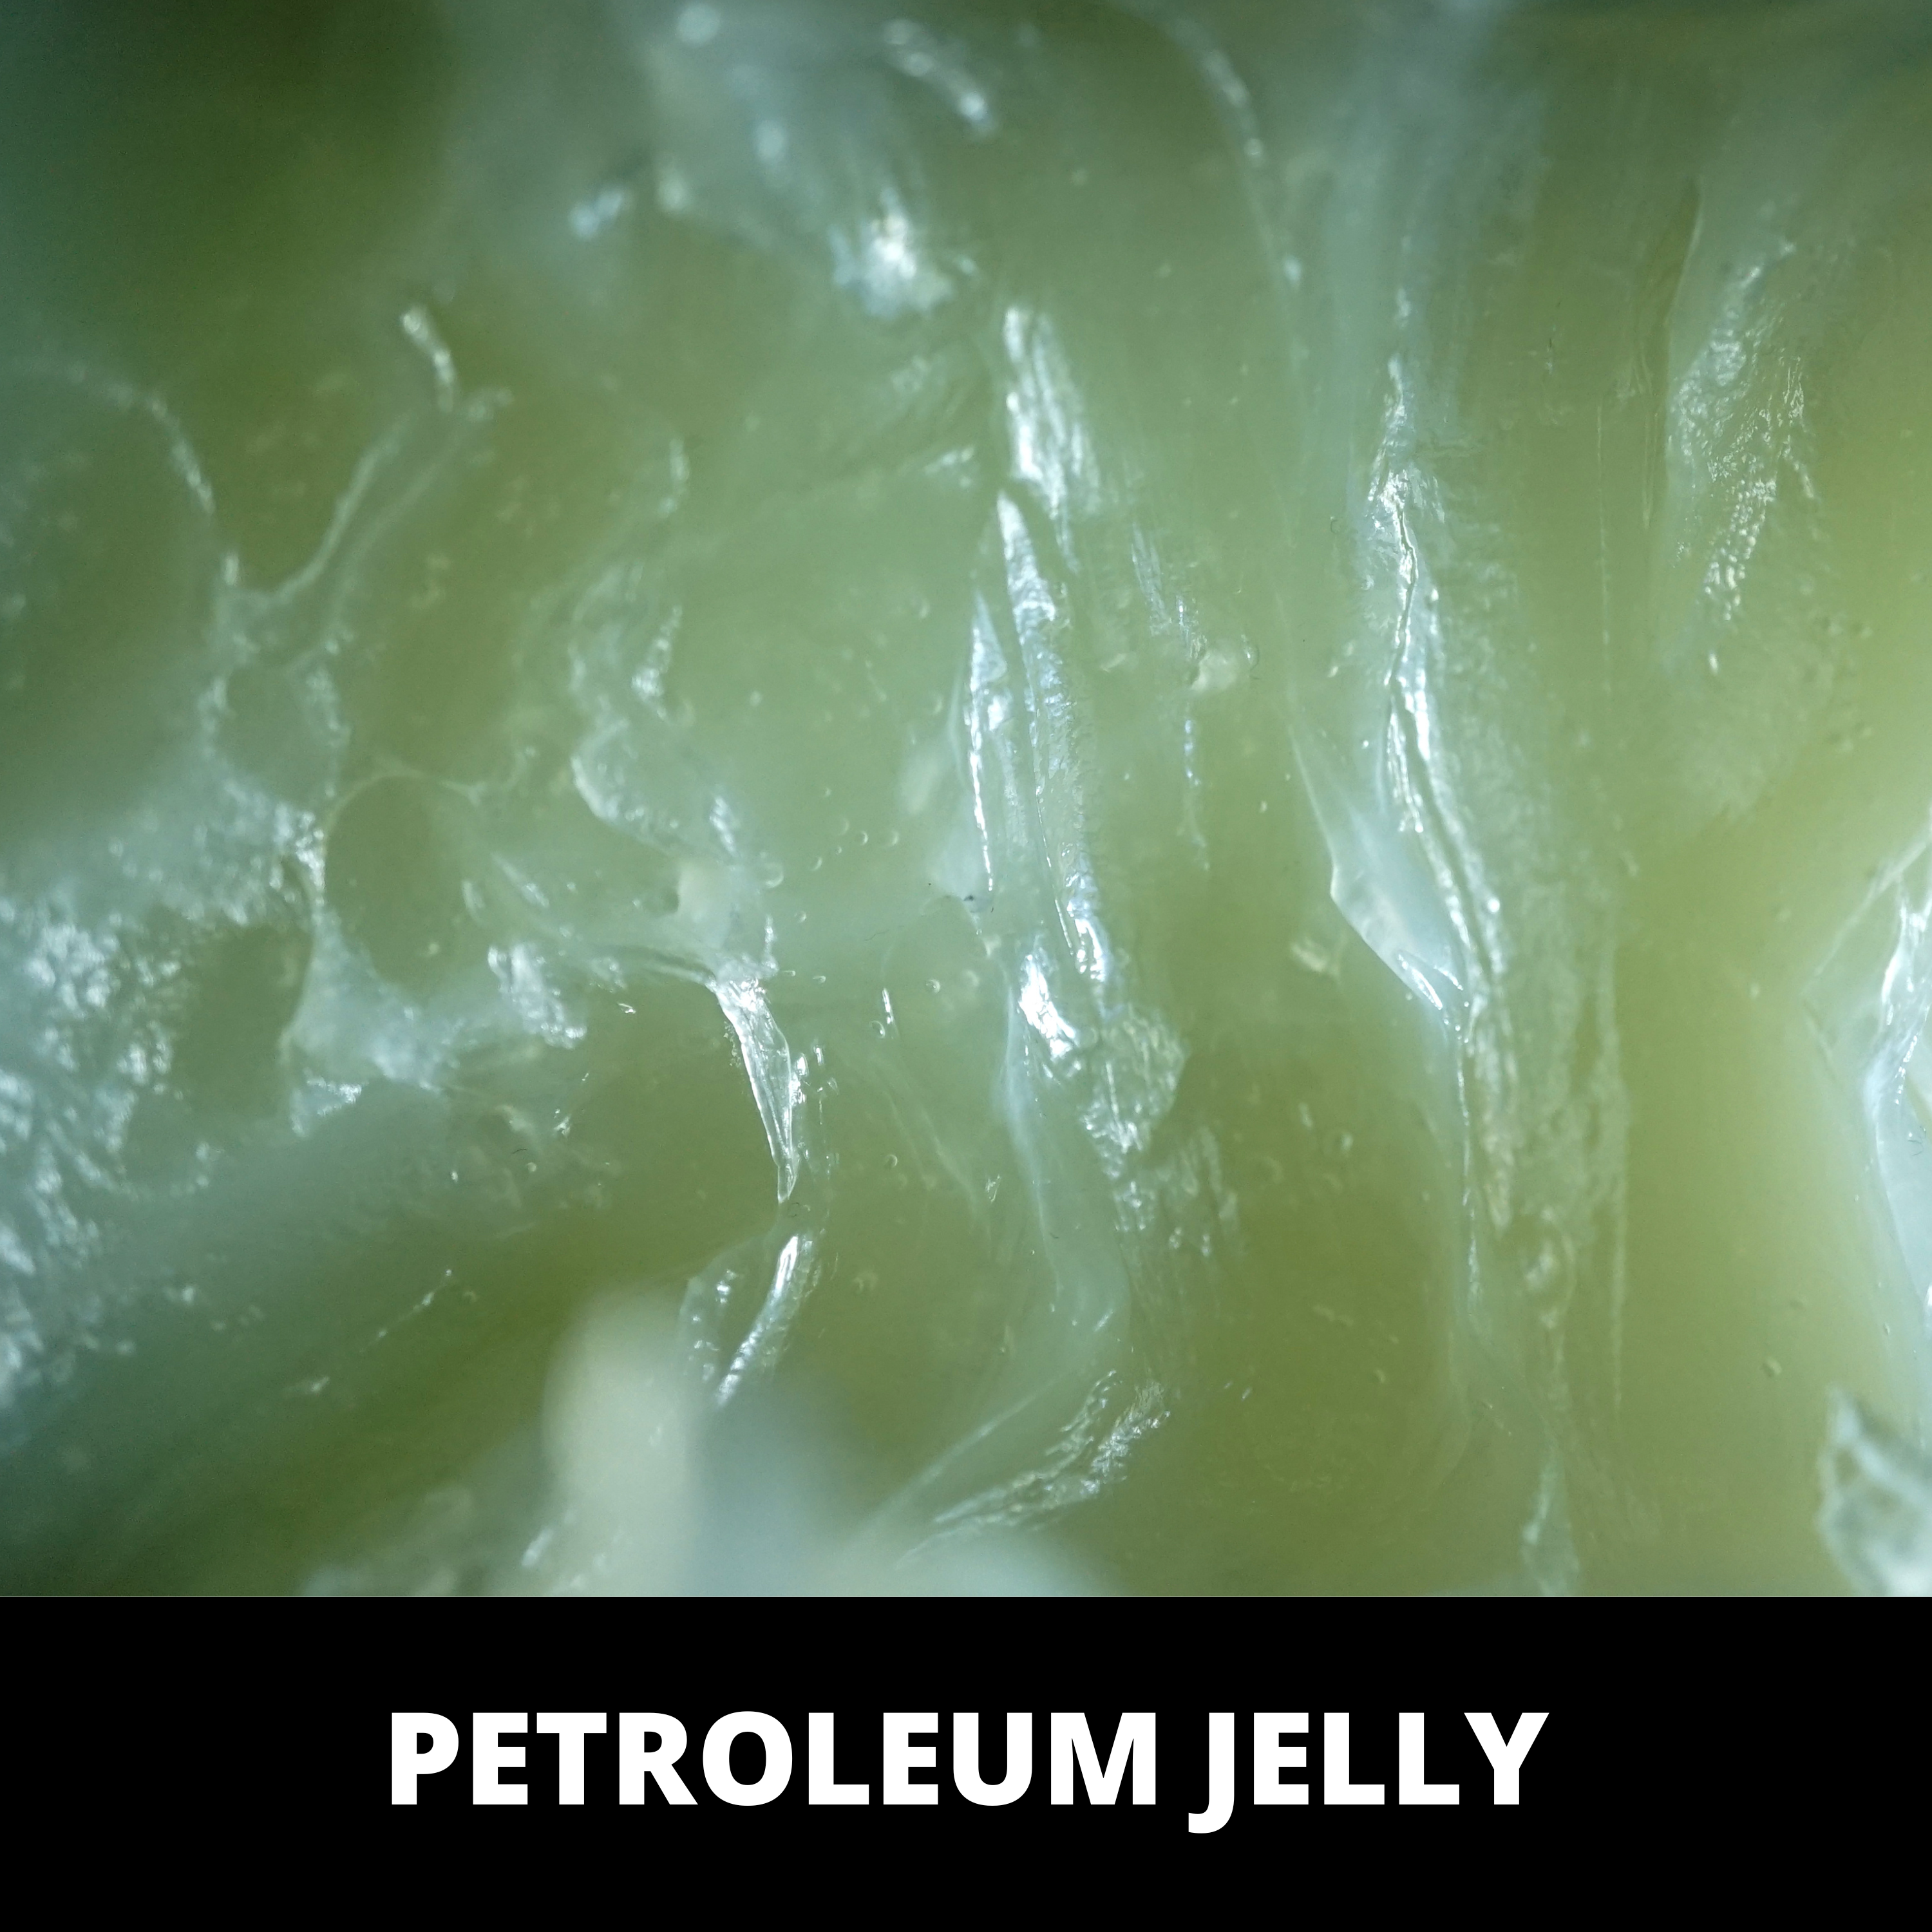 PRODUCT TYPE: Petroleum Jelly